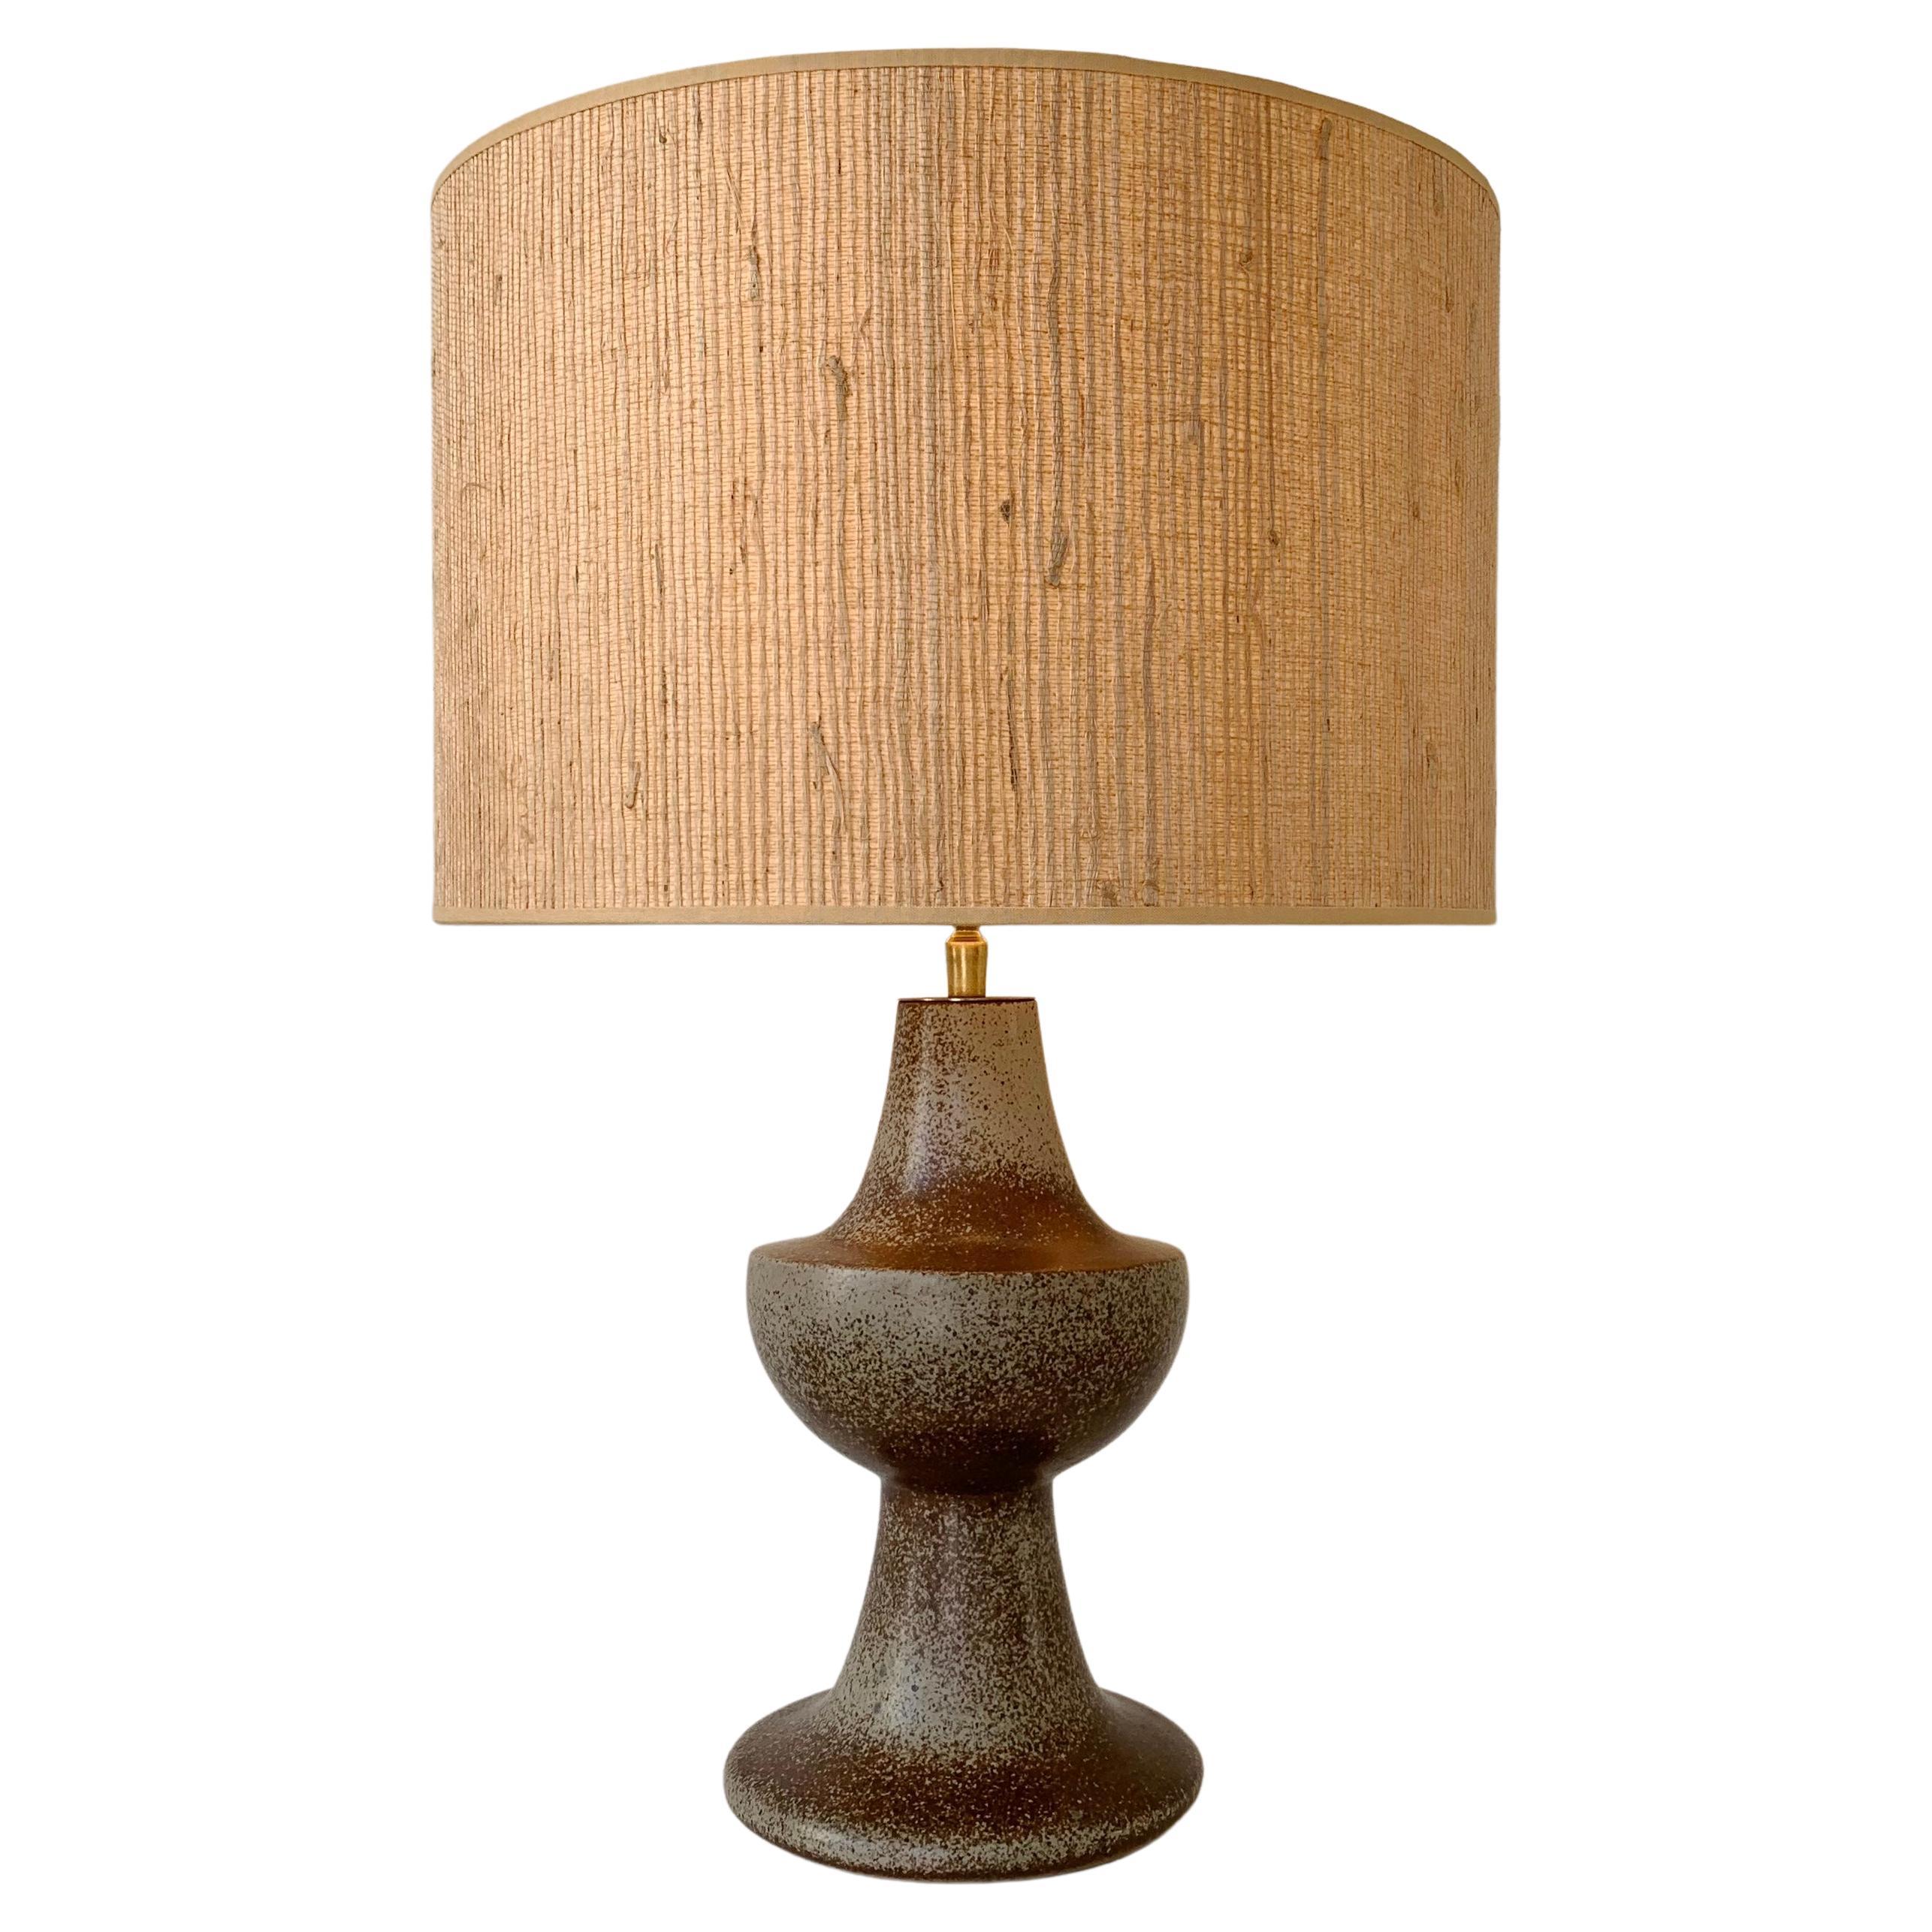 Midcentury Ceramic Table Lamp, circa 1960, France For Sale